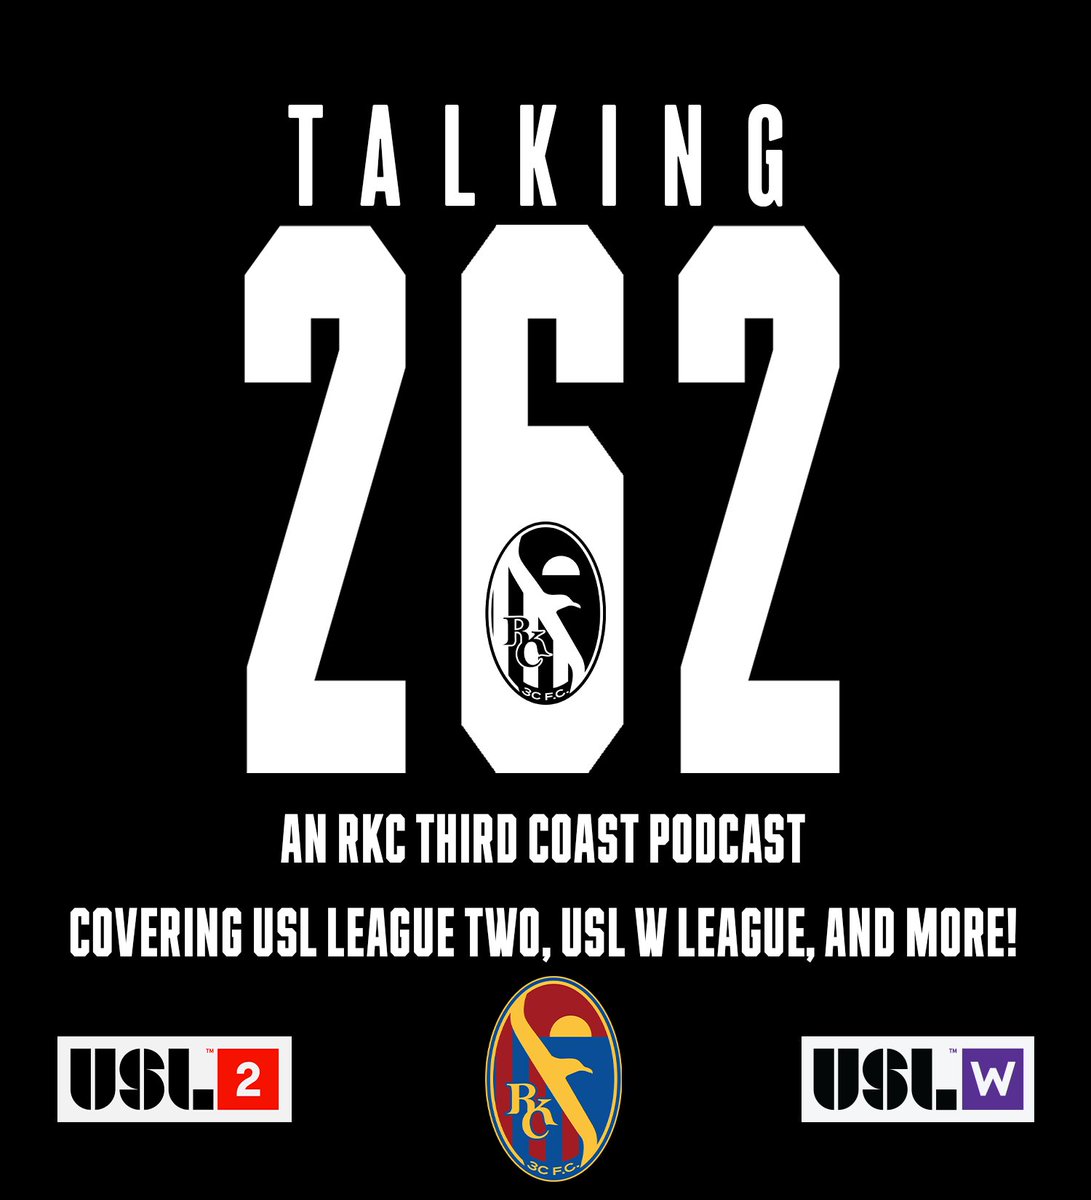 INTRODUCING: TALKING 262, AN RKC THIRD COAST PODCAST!

Once a week, @apokhrel04 and @KarstenLuedtke will sit down with someone in the RKC Third Coast organization. Be sure to tune in to every episode live on YouTube, or post-upload on Spotify!

#262Made | #Path2Pro | #ForTheW